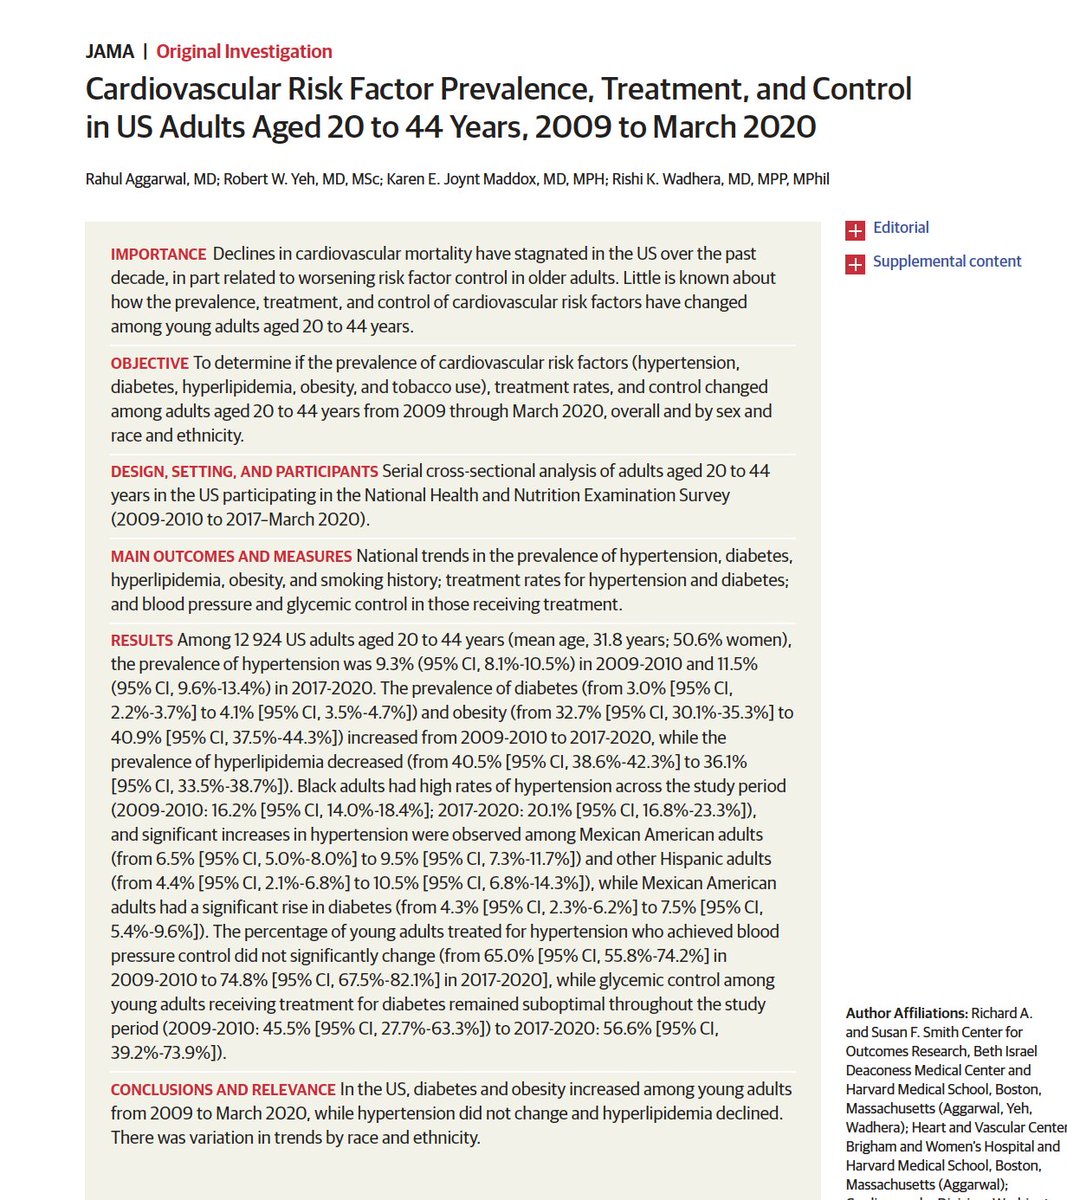 Our new @JAMA_current study evaluates changes in the prevalence, treatment, & control of cardiovascular risk factors in #young #adults over the past decade, and reveals some concerning findings. (Thread) Simultaneously published with #ACC23 #WCC2023: ja.ma/3L0JEp1